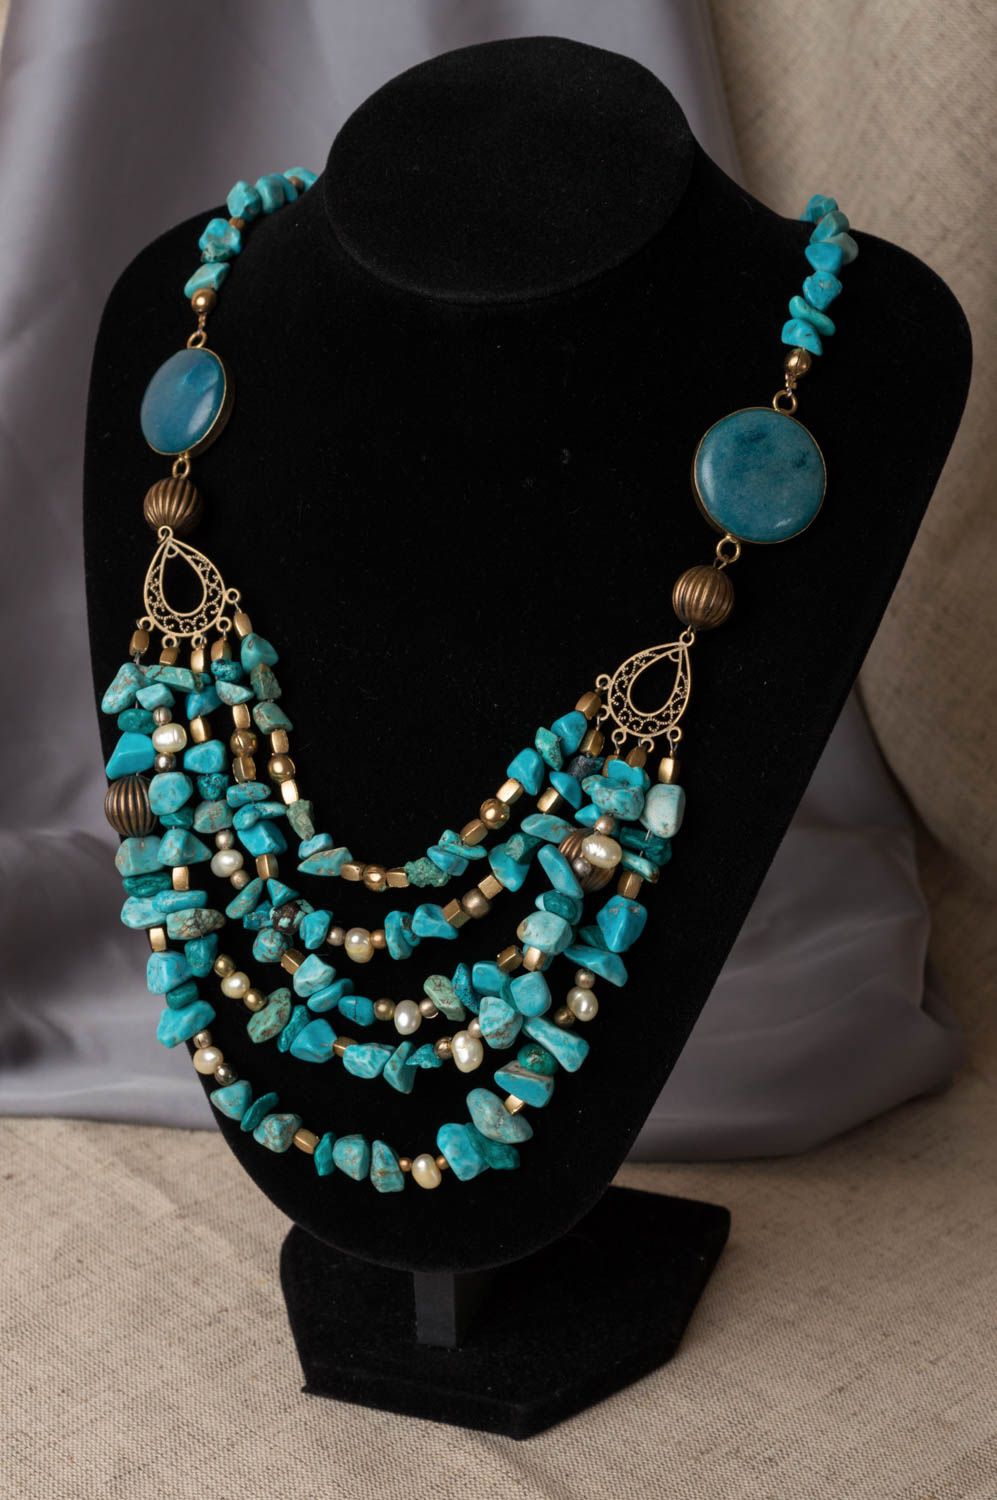 Handmade beautiful turquoise long necklace made of natural stones and metal photo 1